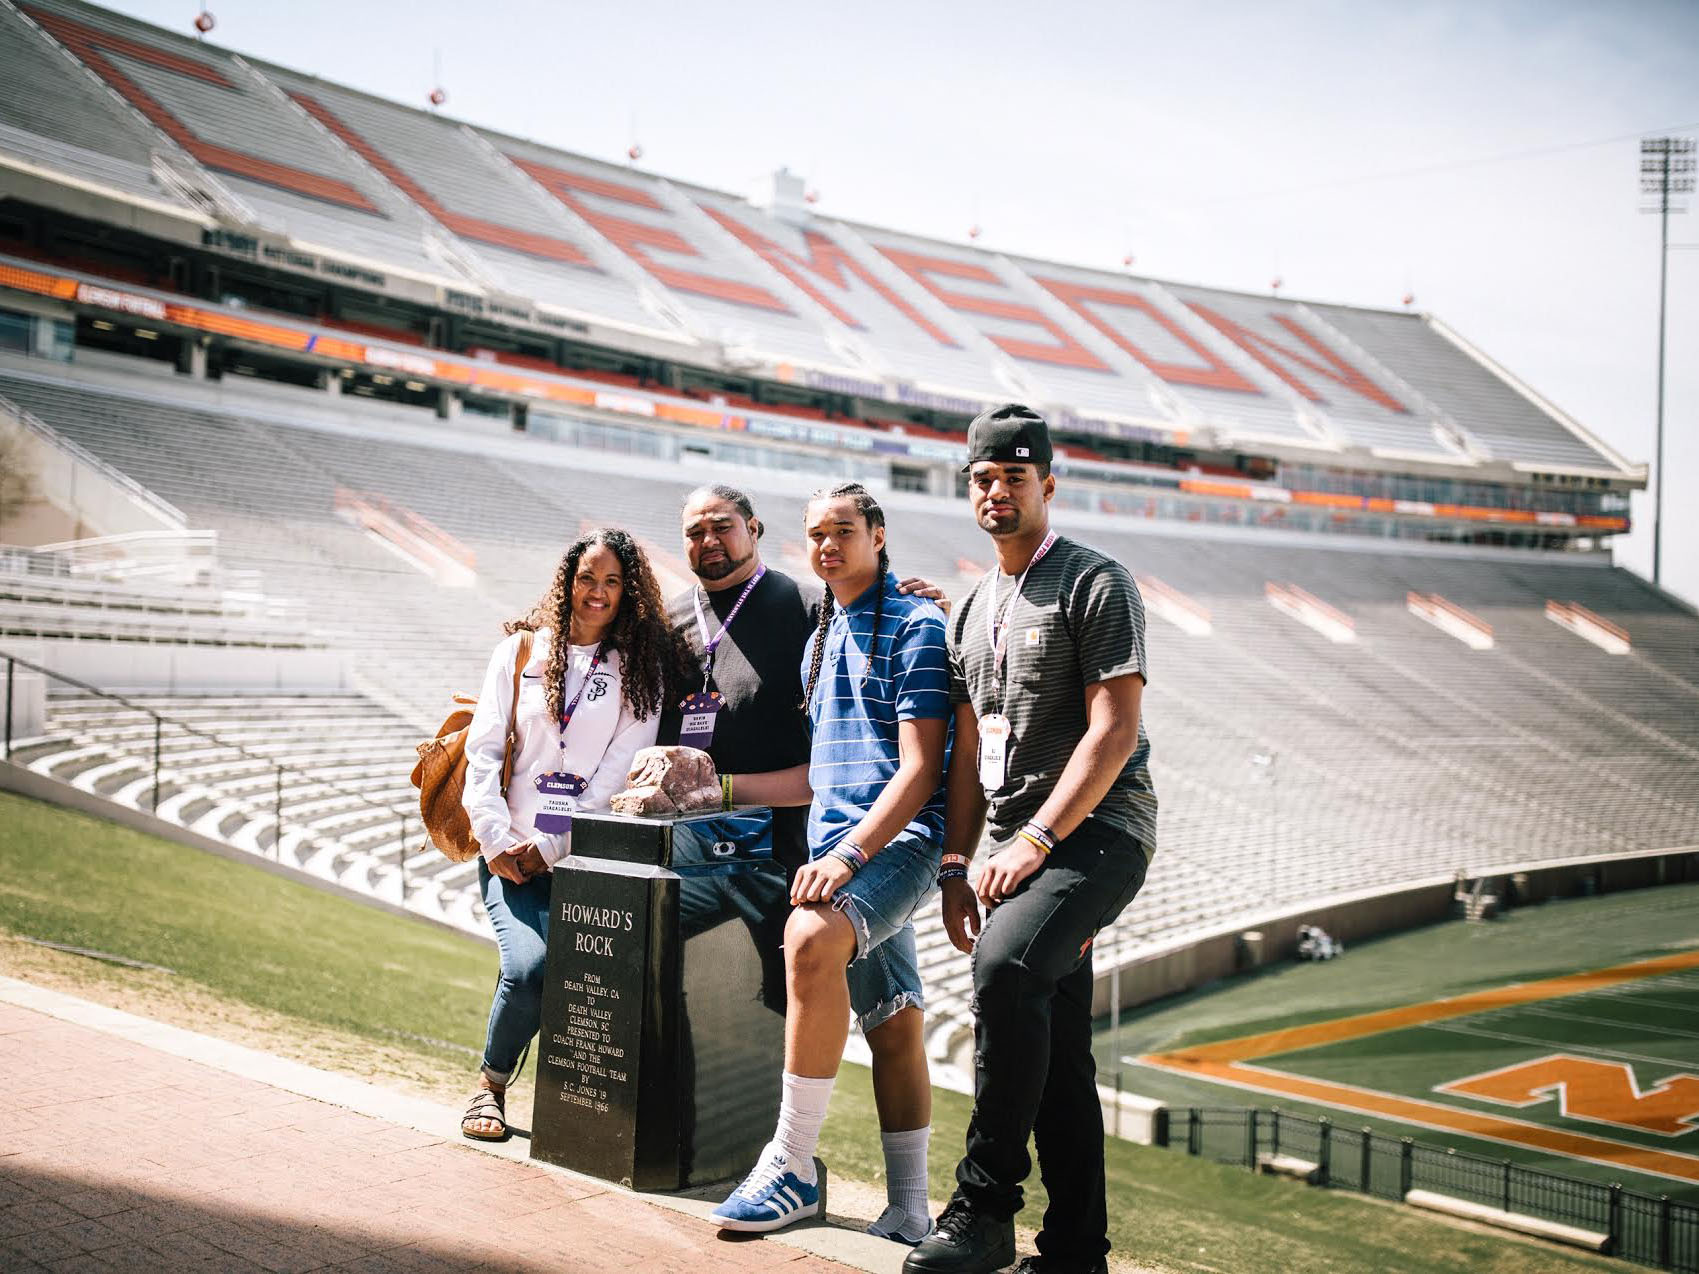 DJ Uiagalelei, the top-ranked quarterback in the 2020 class, visited Clemson last month with his family. From left to right, his mother Tausha, father Dave and brother Matayo.